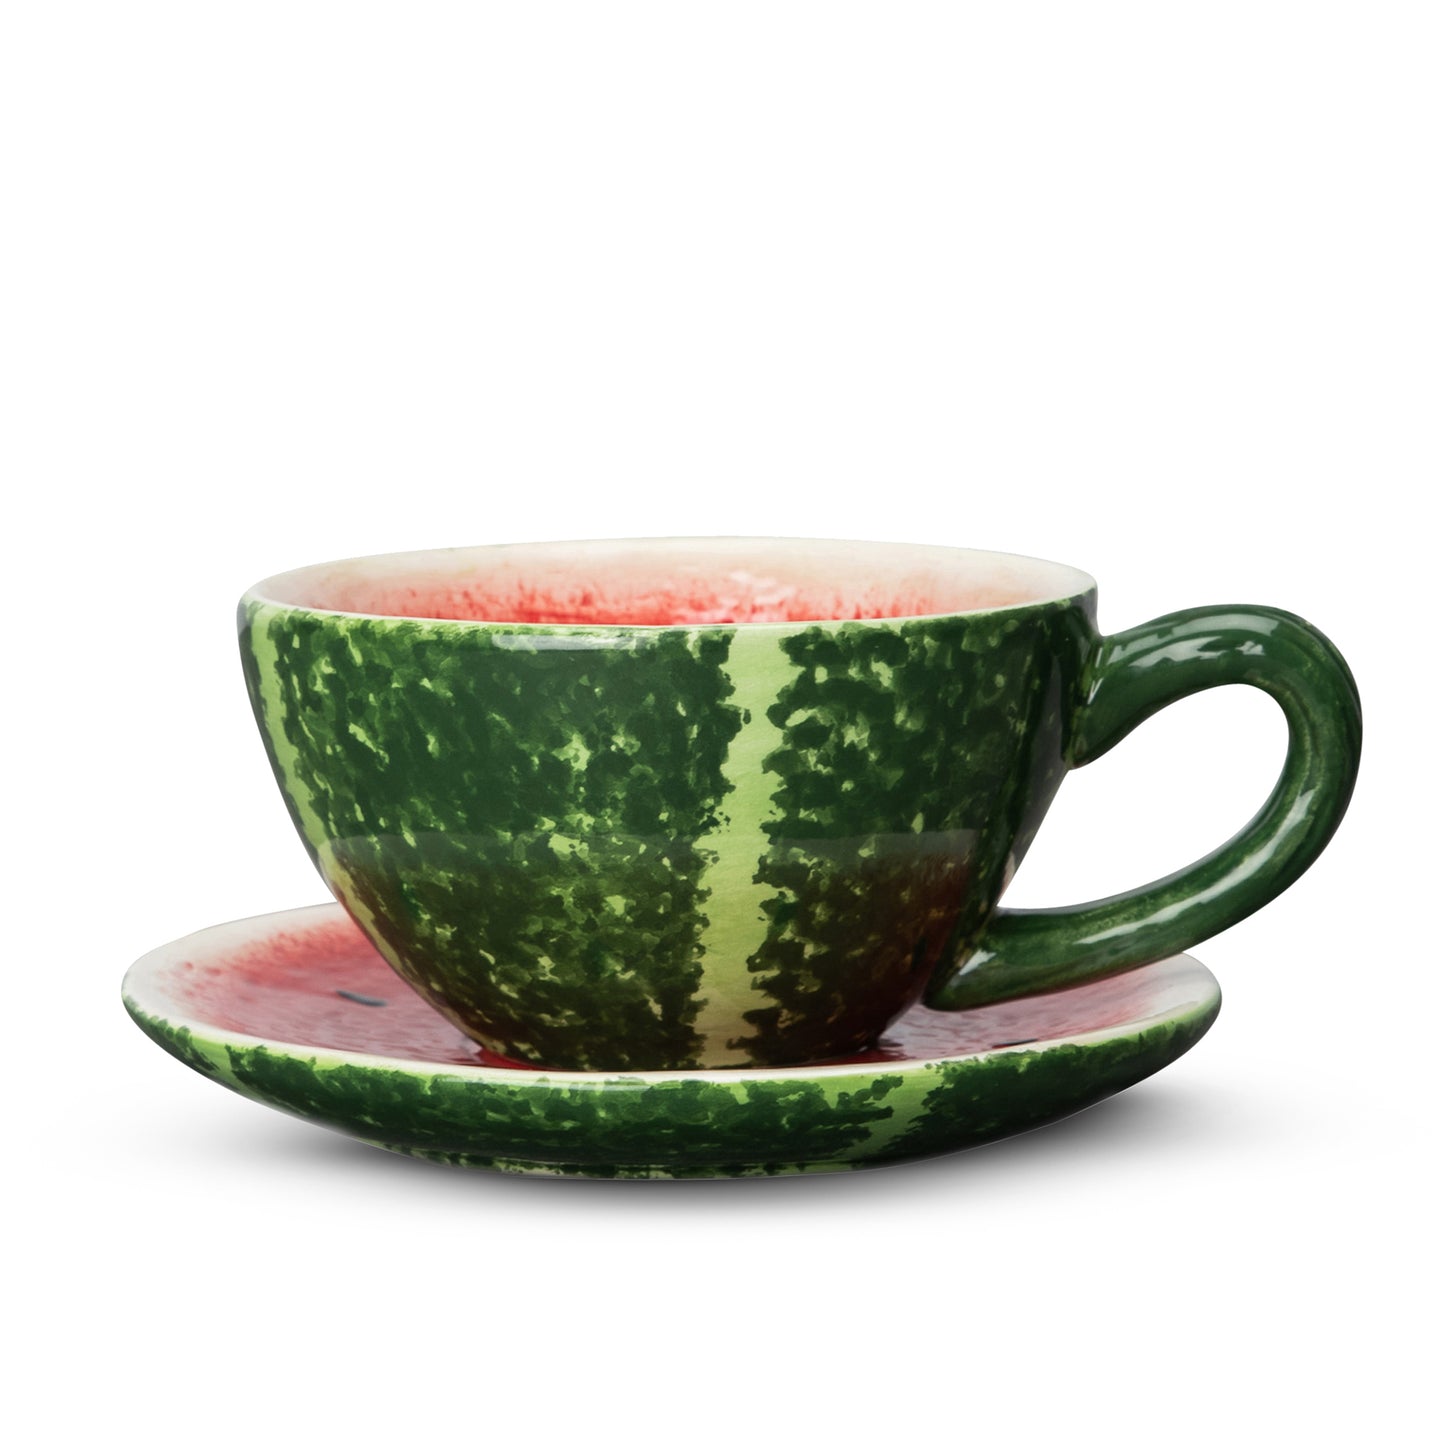 Sagaform Watermelon Plate and Cup  Widgeteer Inc.   5228620912 0001 5228620912 front